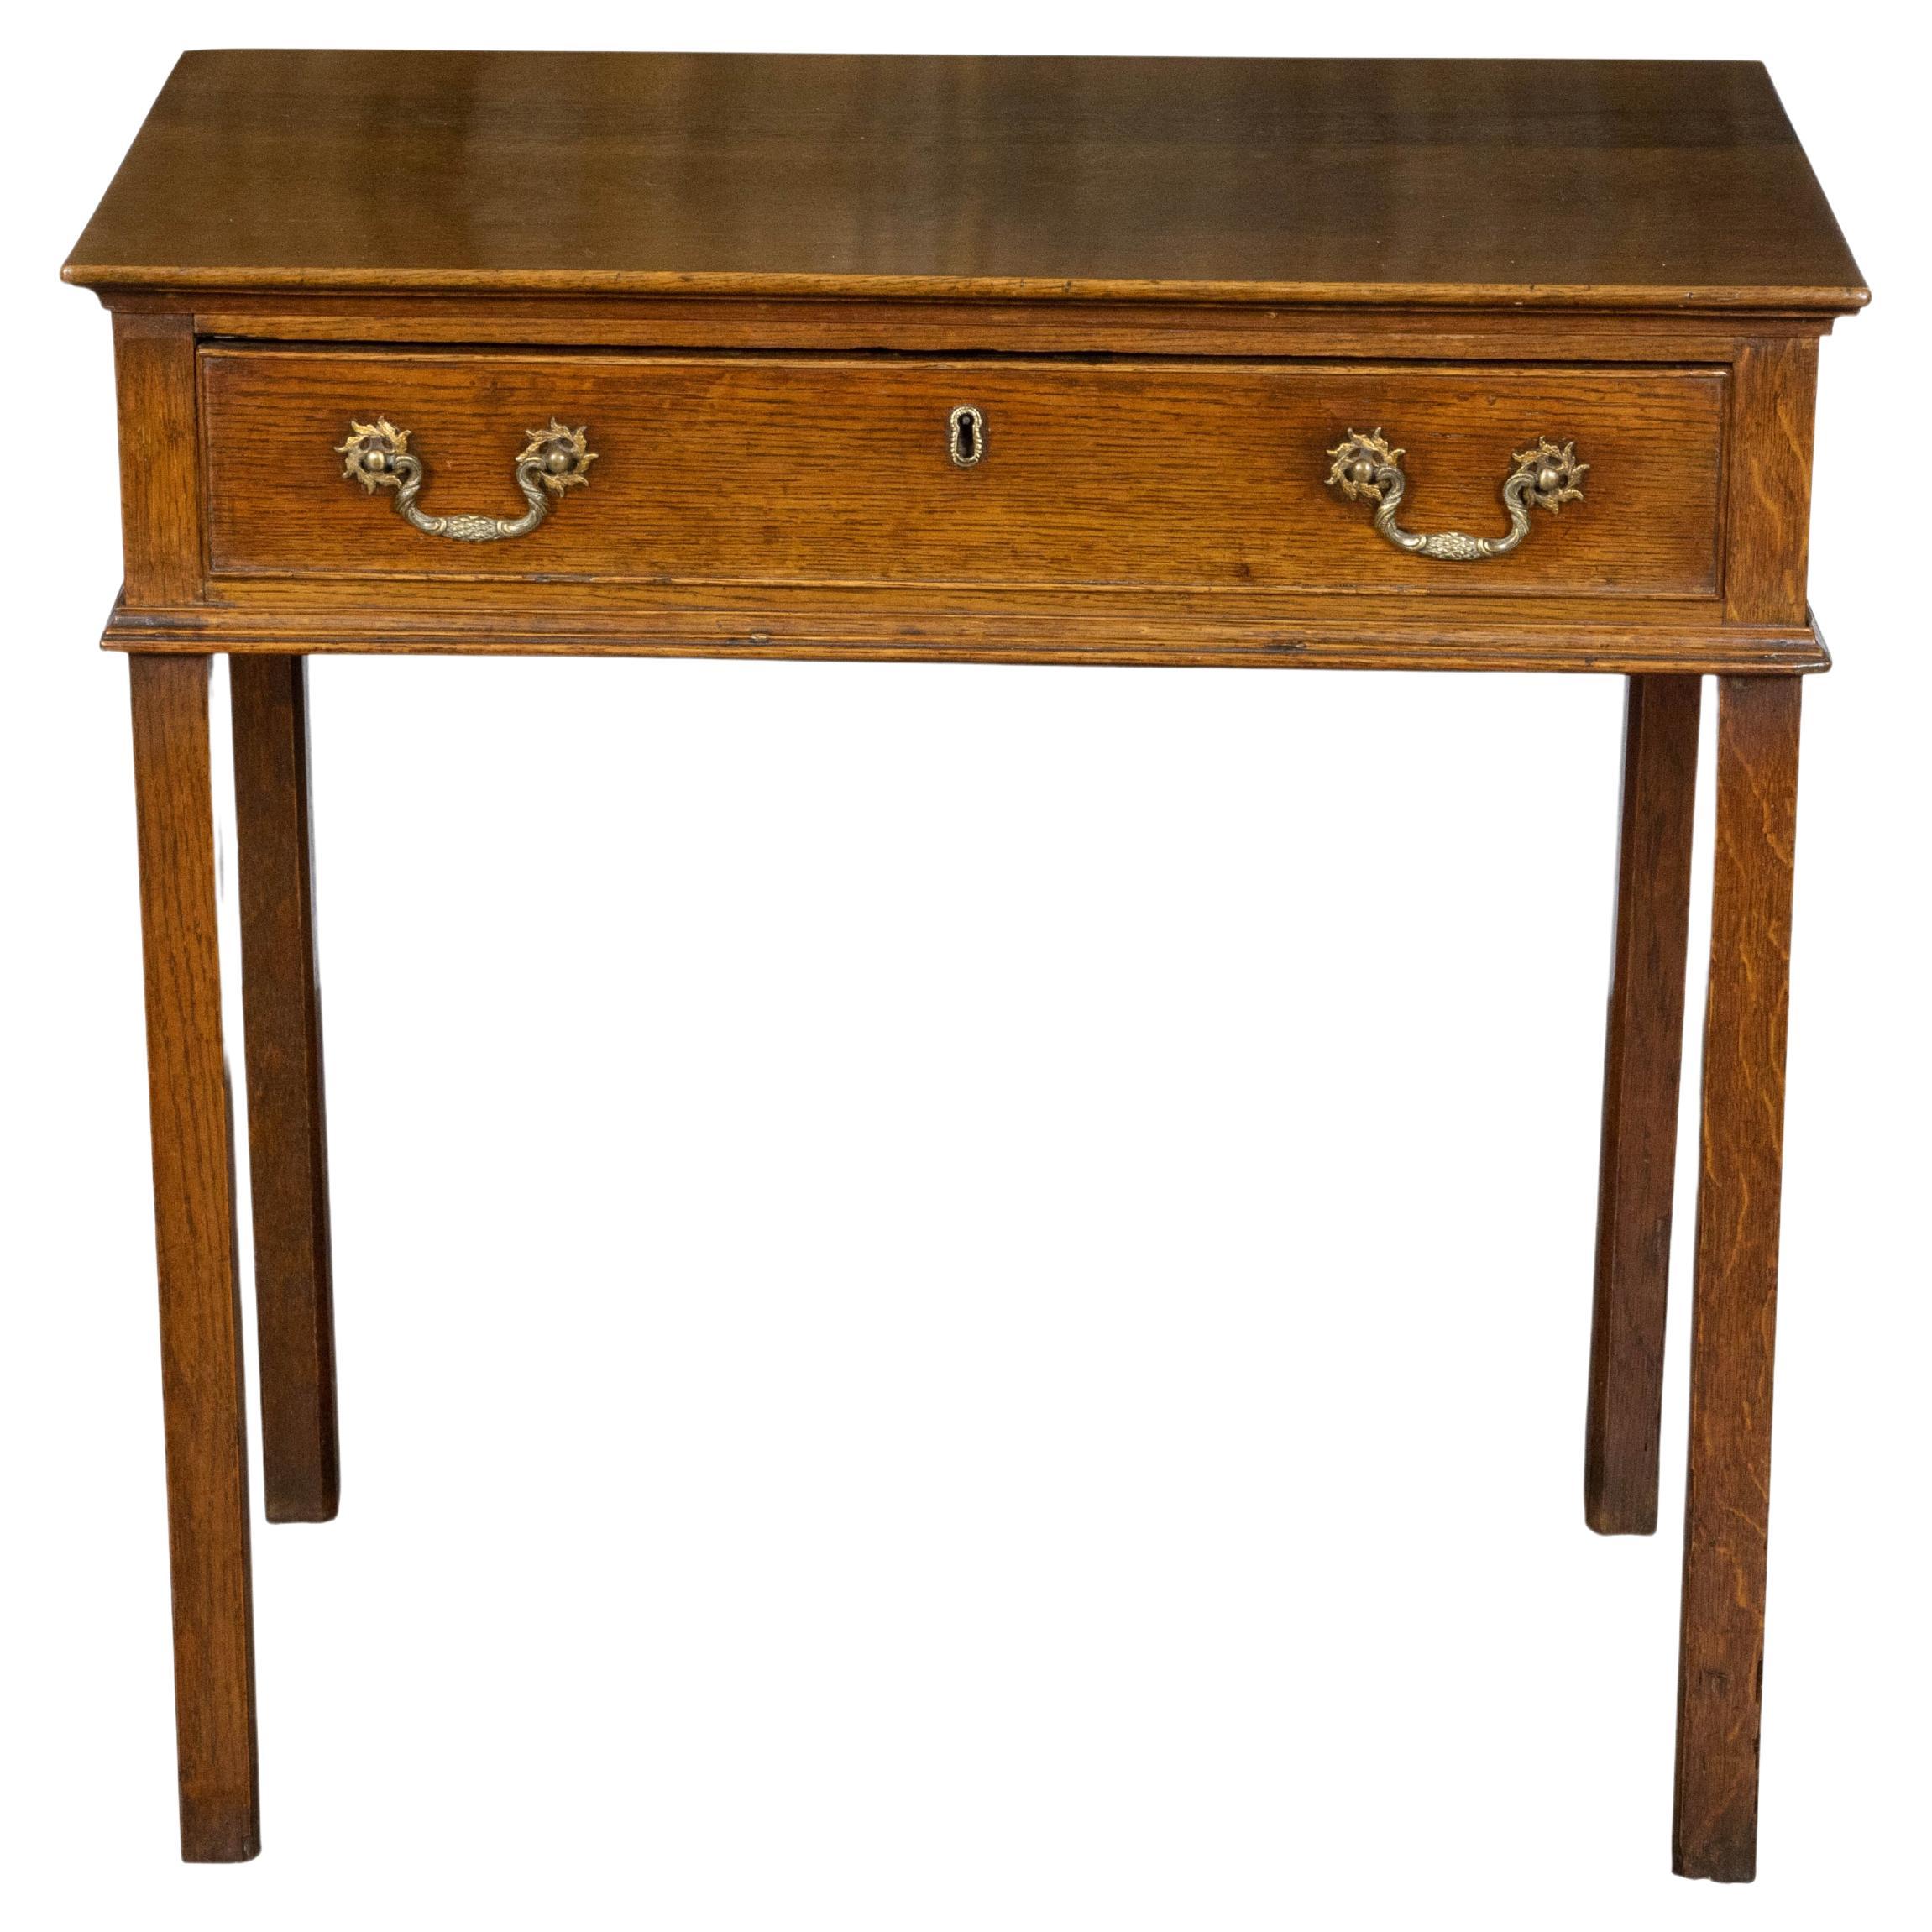 English Oak 1840s Side Table with Single Drawer and Ornate Hardware